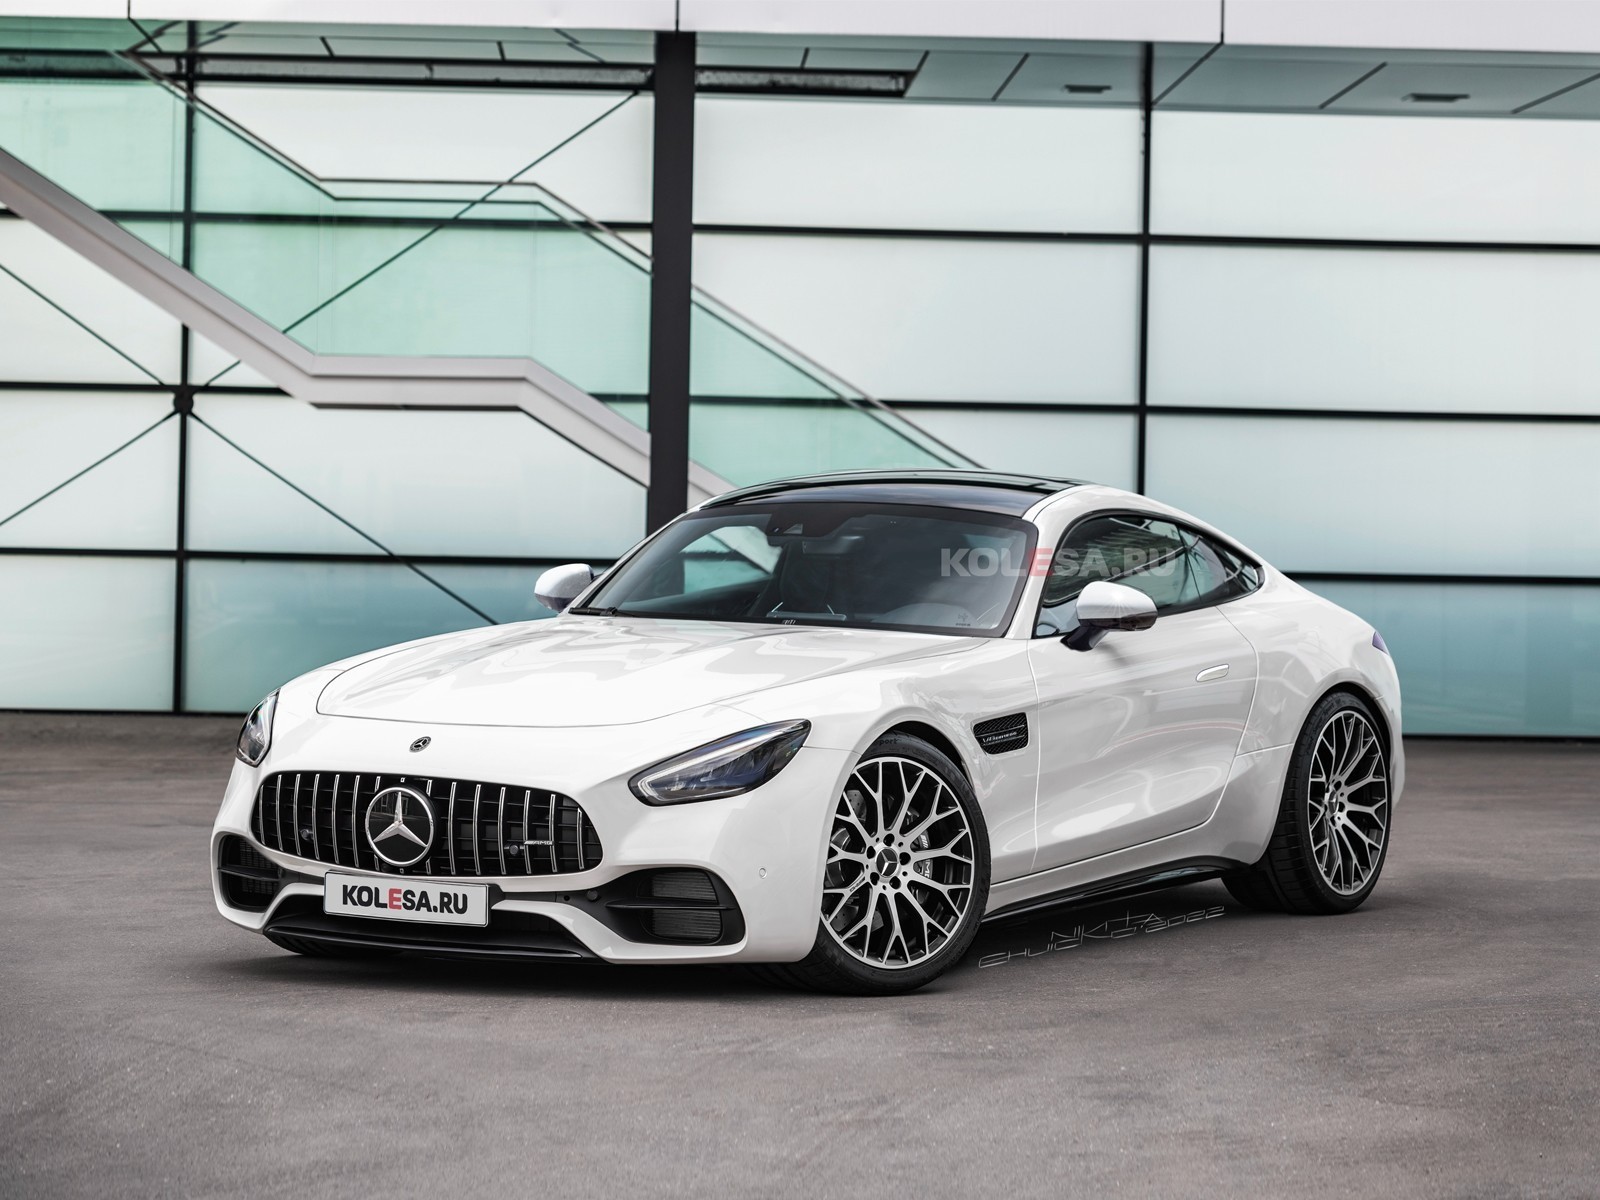 New 2024 MercedesAMG GT Tickles Our Taste Buds in Unofficial